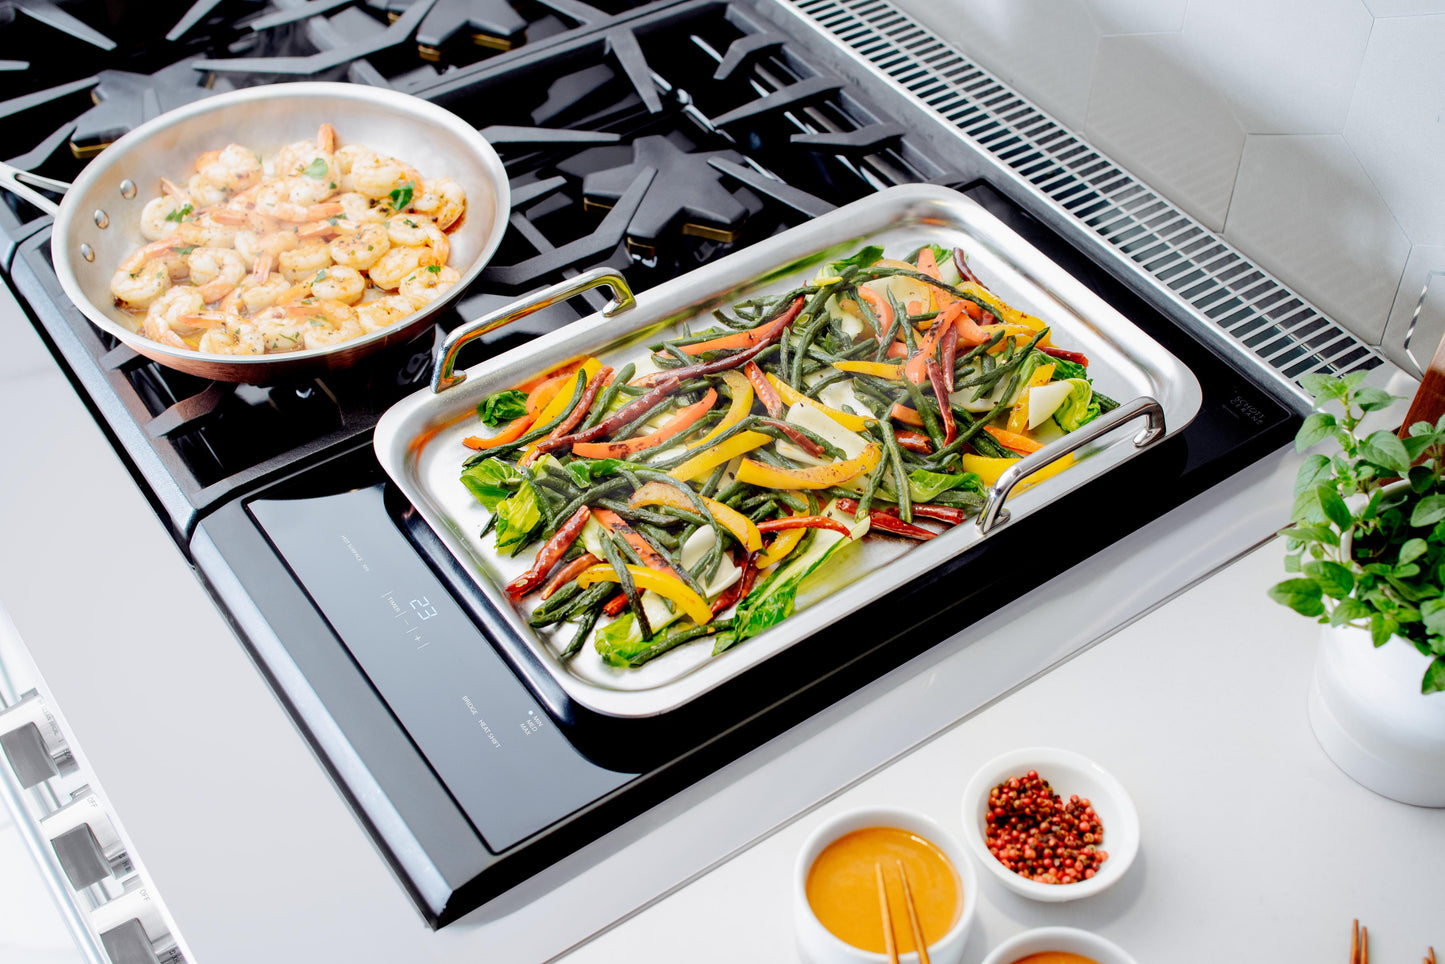 MCSA03005833_Thermador-induction-cooktop-feature_def